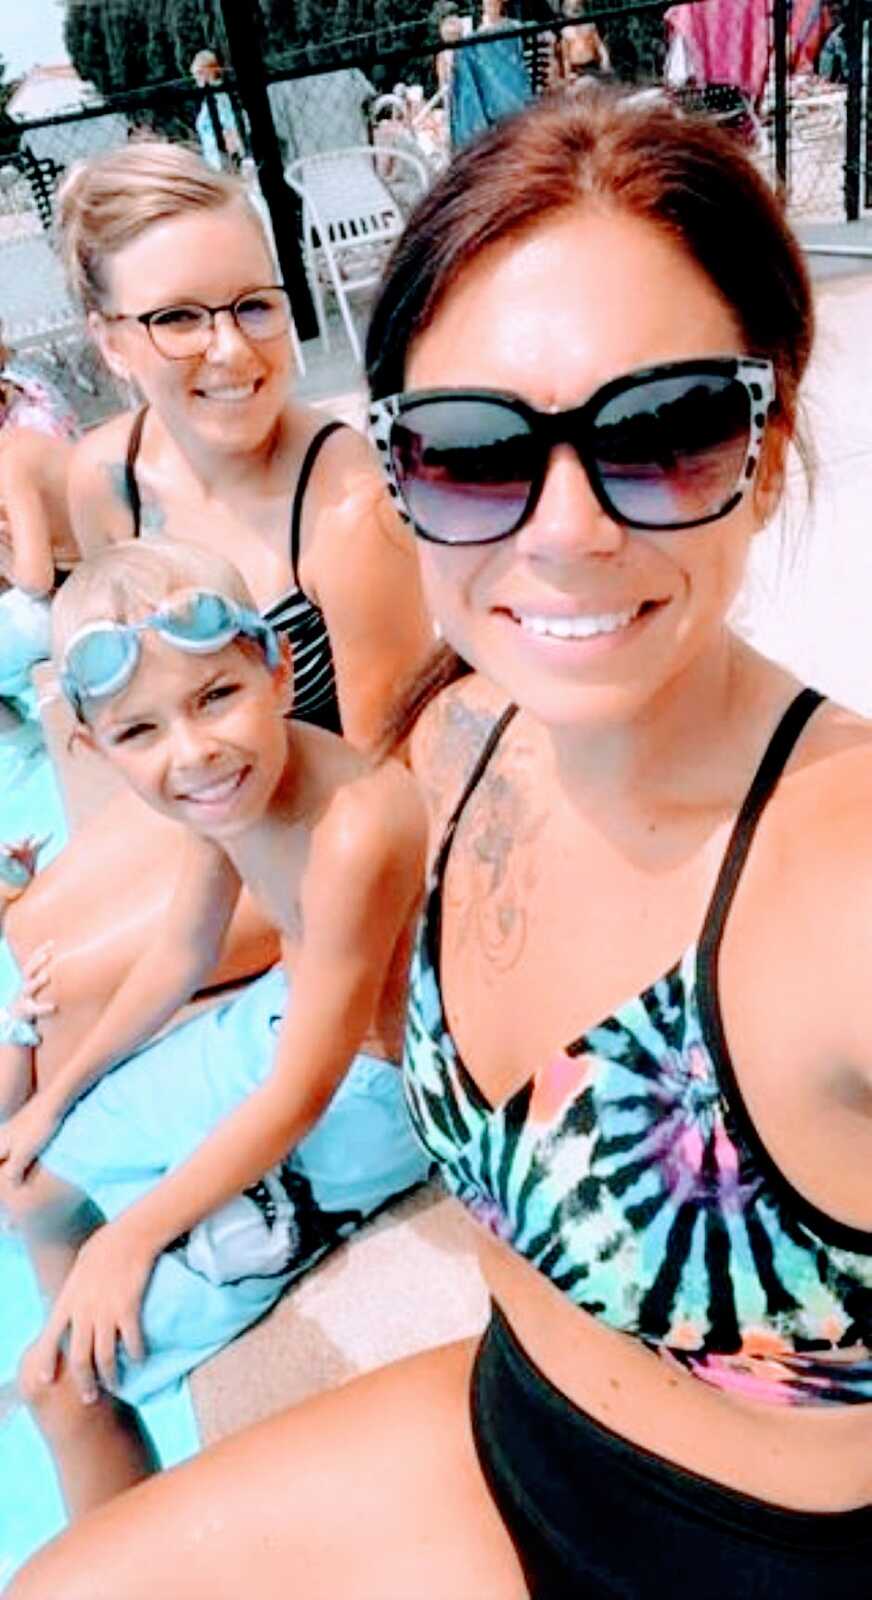 Biological mom and bonus mom take a selfie at the pool with their shared son